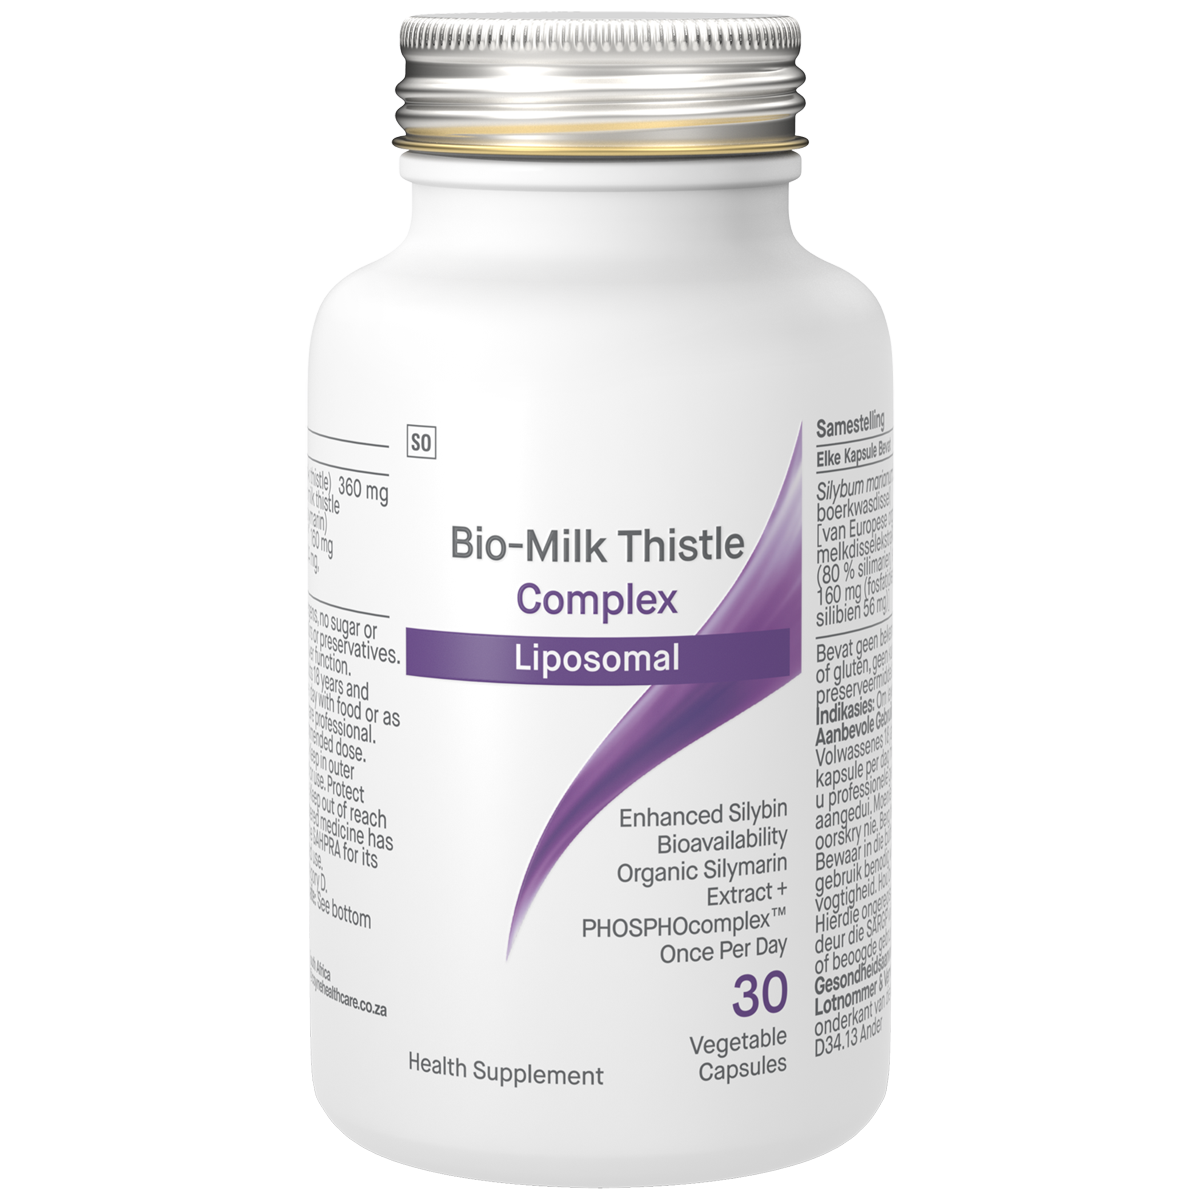 BIO-MILK THISTLE is a western herbal medicine that is used to support liver function in adults 18 years and older. In addition, BIO-MILK THISTLE may help to relieve digestive disturbances or indigestion, including discomfort following overindulgence.